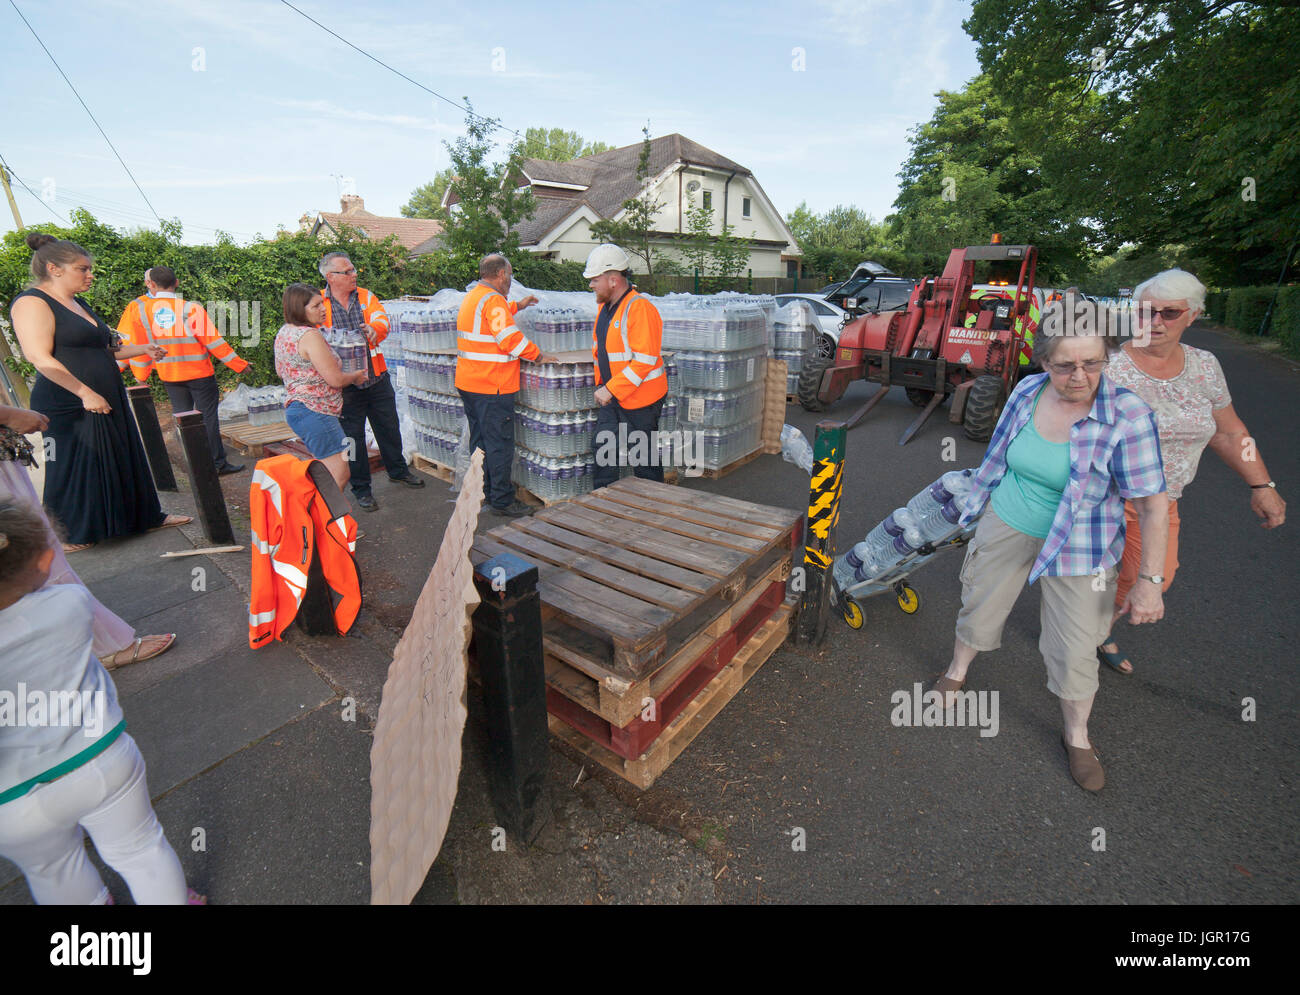 Biggin Hill, Bromley, London, UK. 10th July, 2017. London residents wake up to no water supply, in the TN16, TN14, CRO, BR2 areas. Thames Water hand out emergency water supplies after a major burst pipe two days ago. Credit: Tony Watson/Alamy Live News Stock Photo